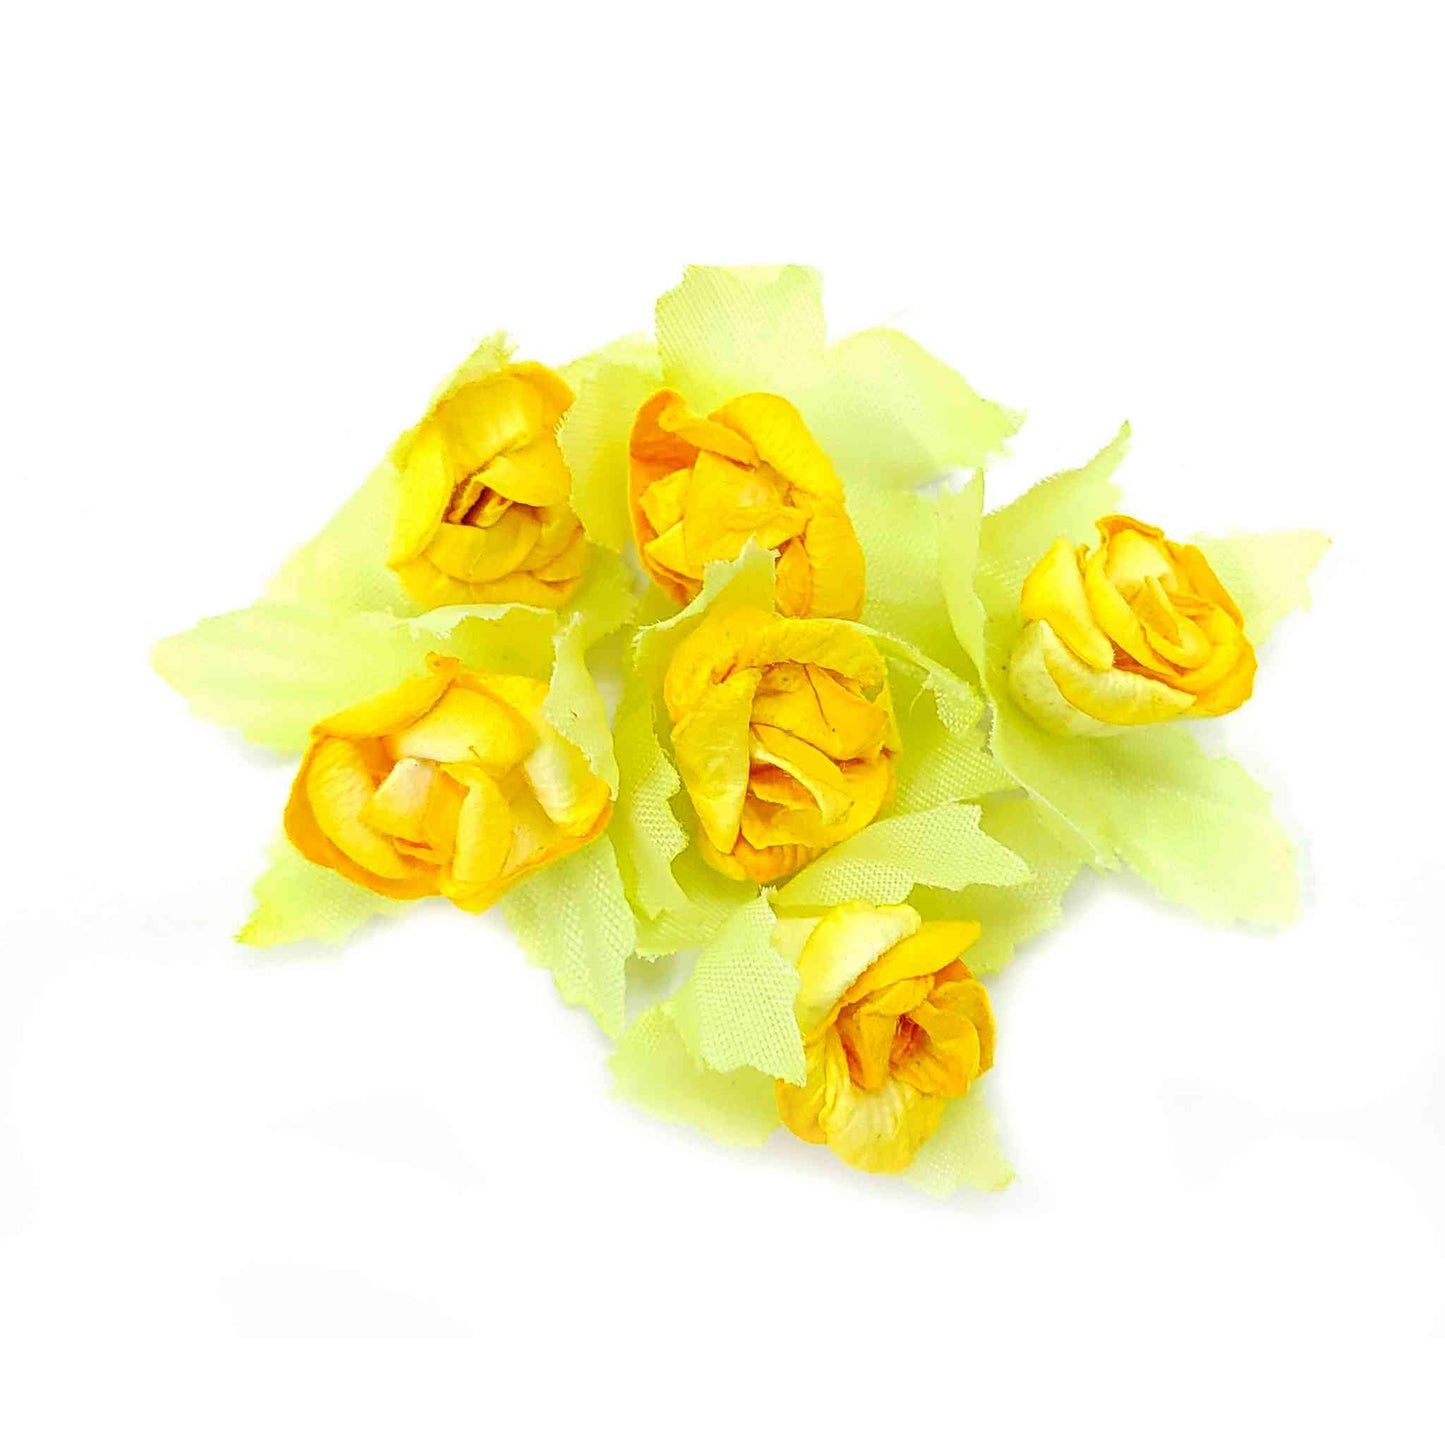 Indian Petals Beautiful Small Paper Flowers with Leaf for DIY Craft, Trouseau Packing or Decoration (Bunch of 12) - Design 30, Yellow - Indian Petals